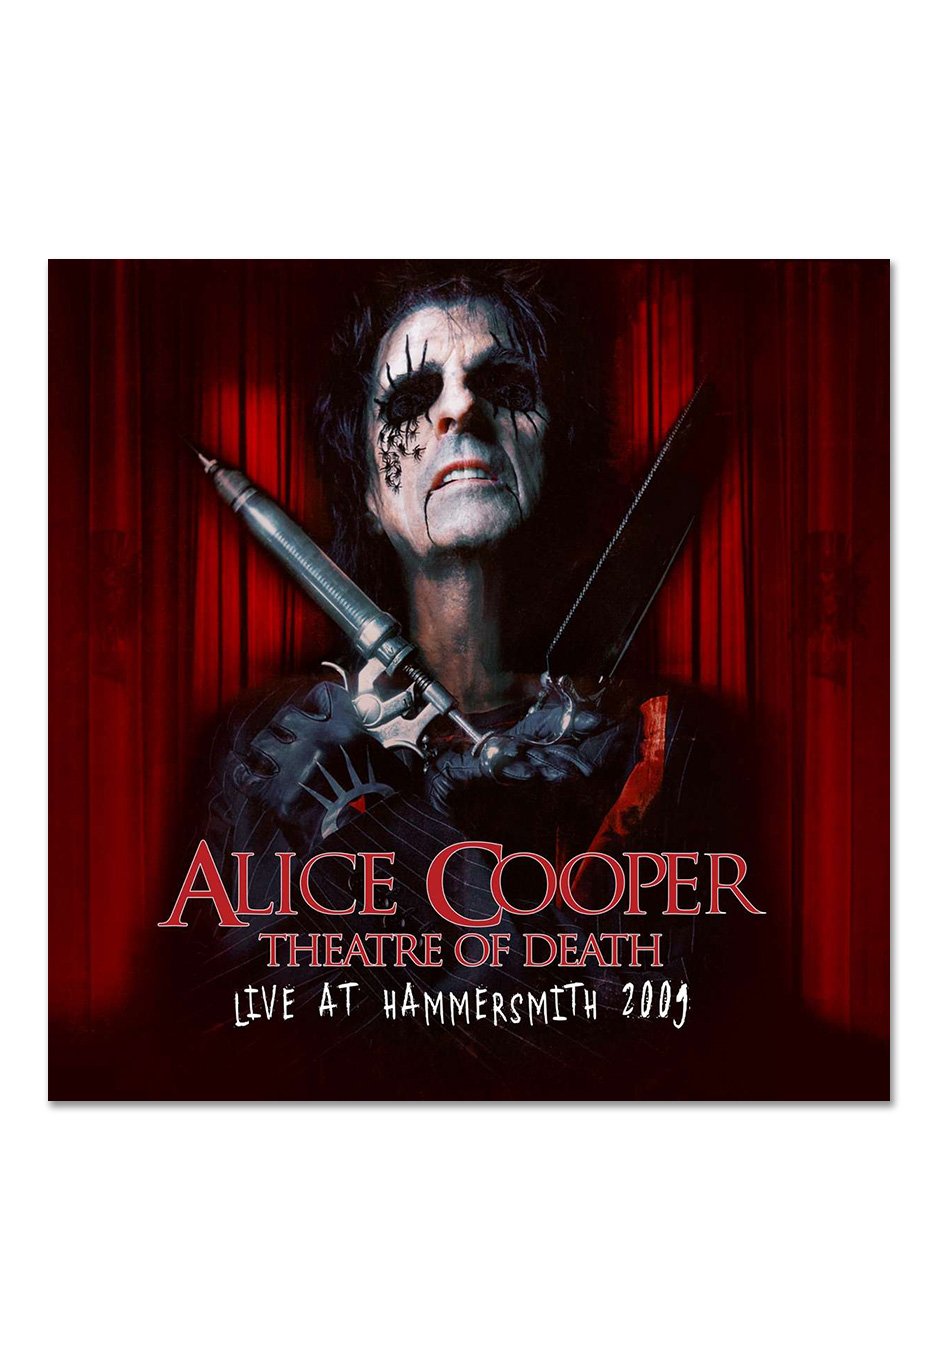 Alice Cooper - Theatre Of Death (Live At Hammersmith 2009) Ltd. Red - Colored 2 Vinyl + DVD